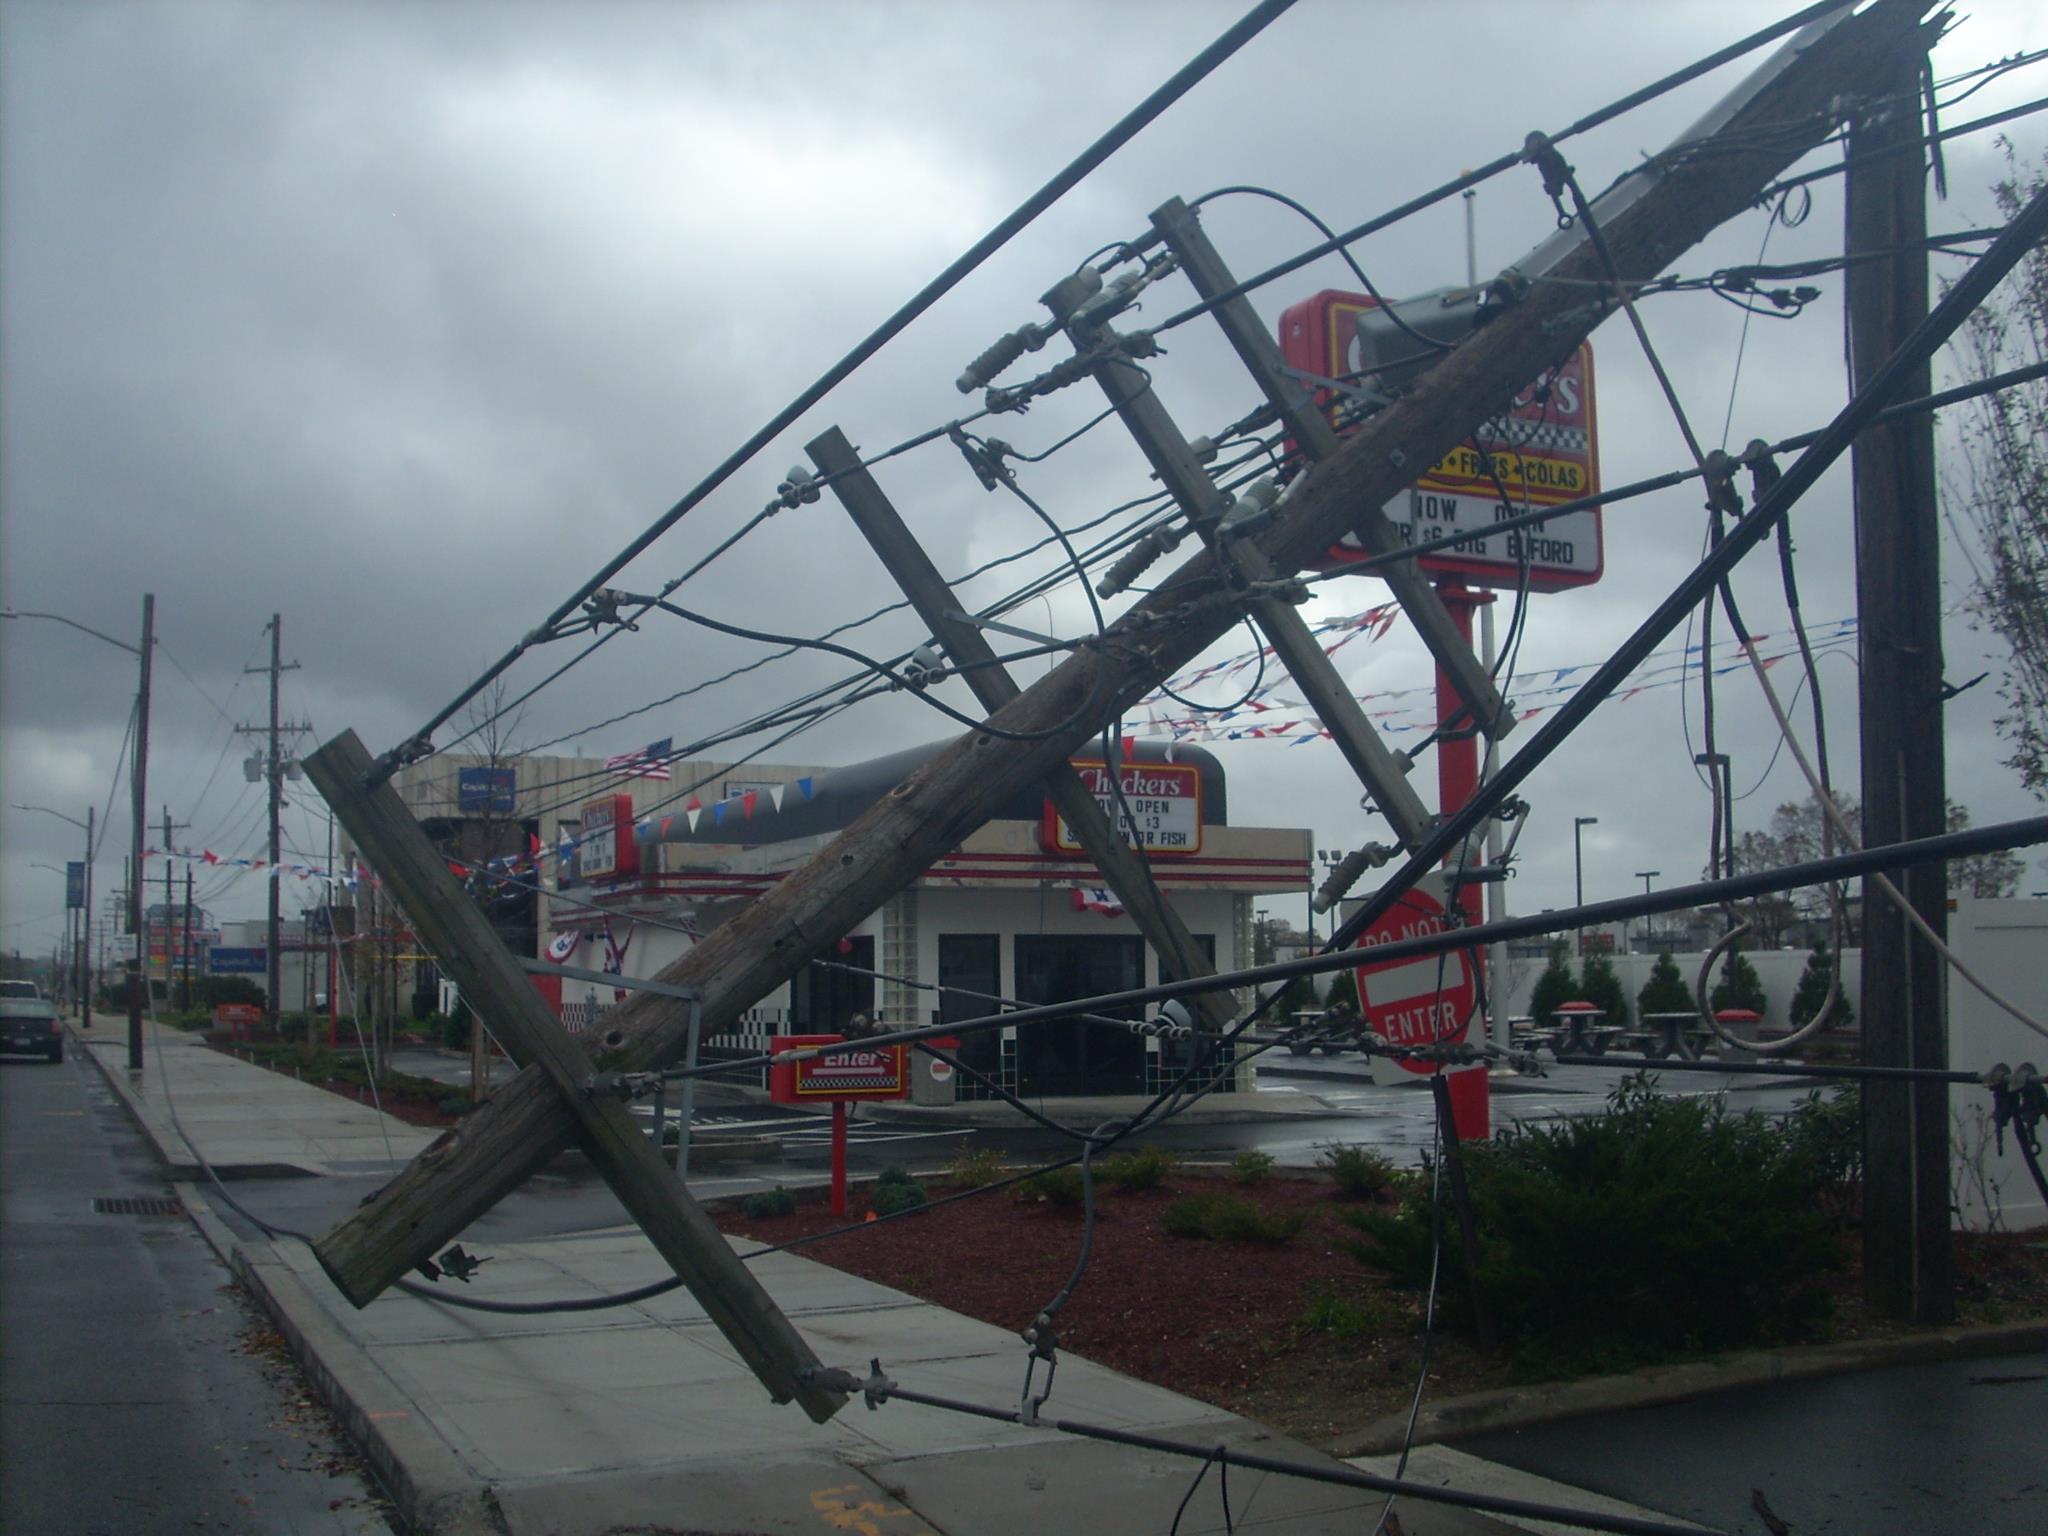 The scene outside Checkers Drive-In on Sunrise Highway in Massapequa following a visit from Hurricane Sandy. (Christopher Twarowski/Long Island Press)